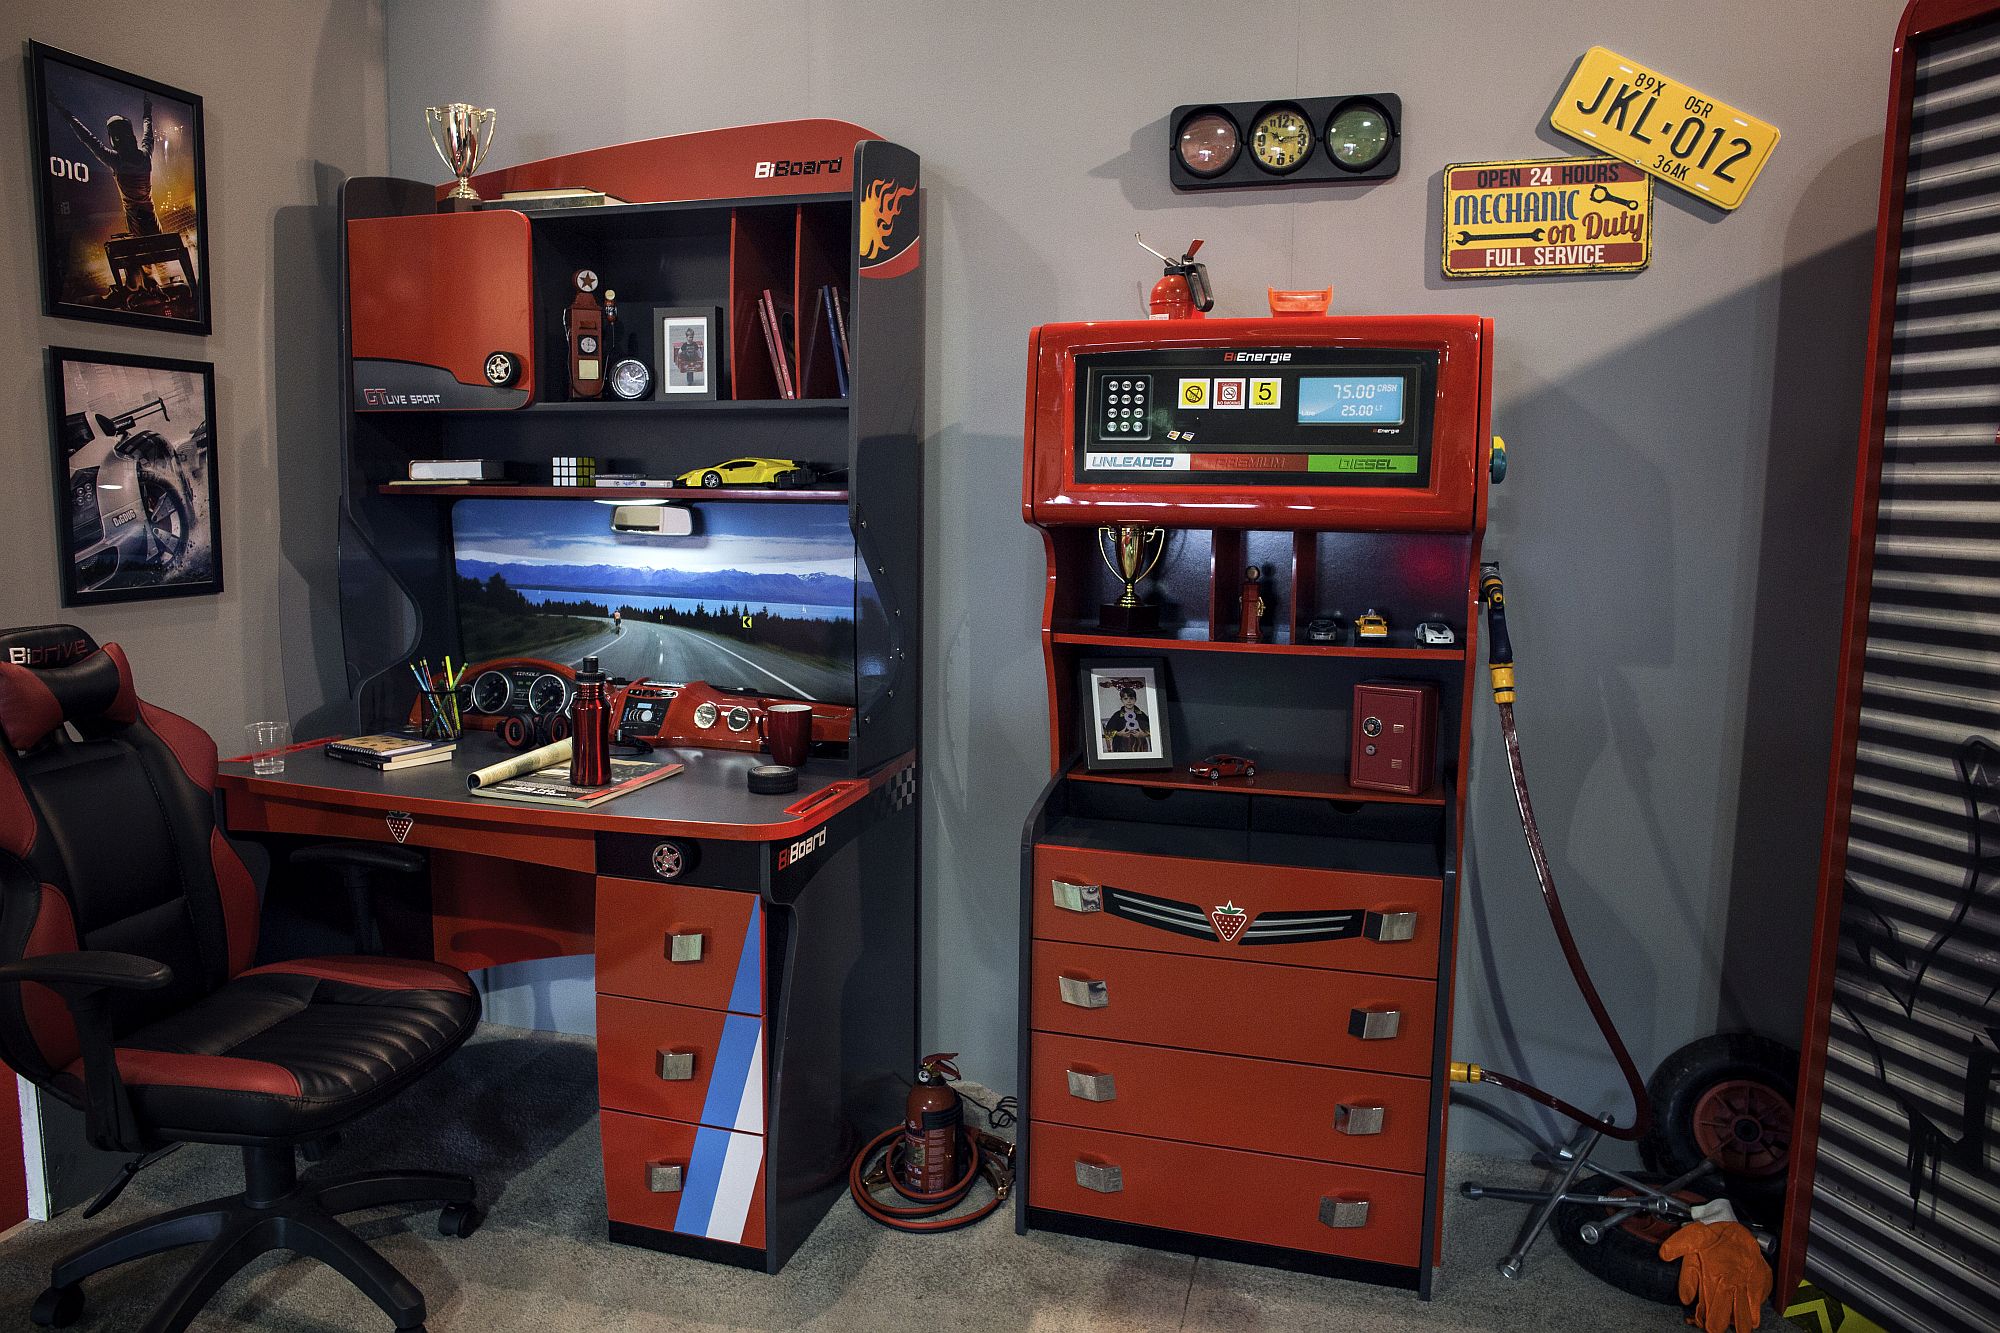 Kids workstation and decor design inspired by arcade gaming consoles